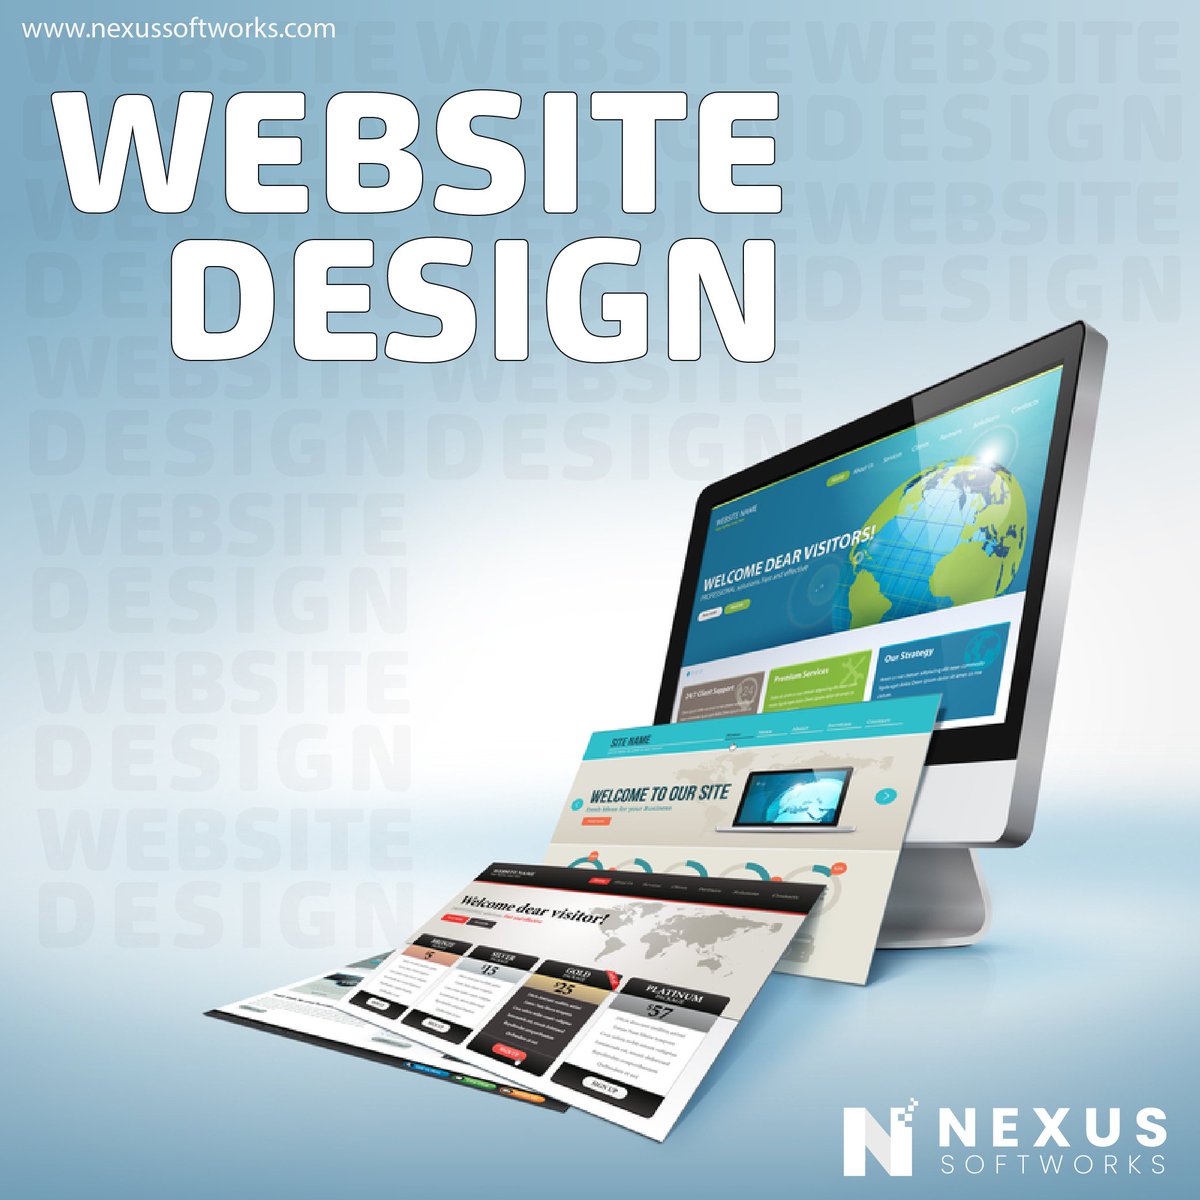 The power of effective design and watch your online presence soar. Discover our comprehensive website design services and take your brand to new heights.
.
.
#nexussoftworks #webdesign #WebDevelopment #websiteoptimization 📈🖥⚡🎯